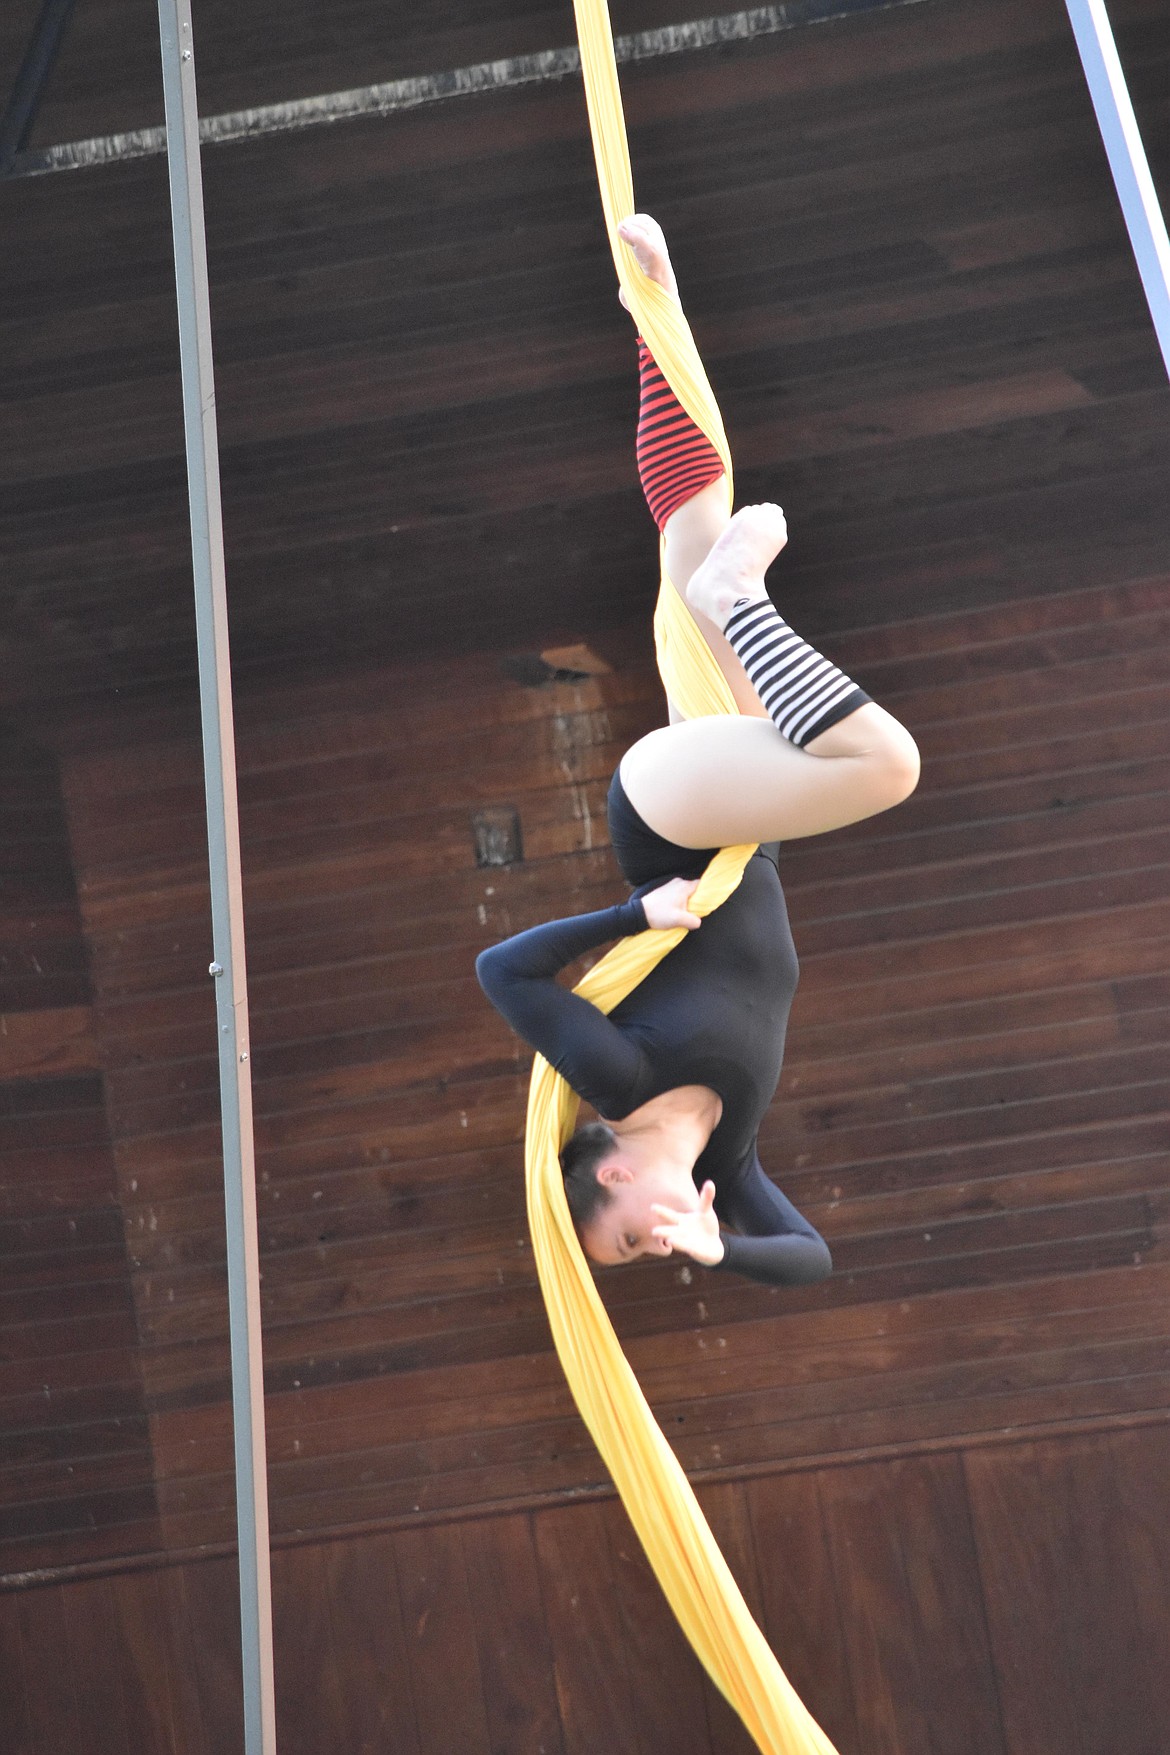 Spokane Aerial Performance Arts was started in 2011 by Sherrie Martin. Now 63, Martin said that if she can do a pull-up and remain active enough for the show, anyone can.